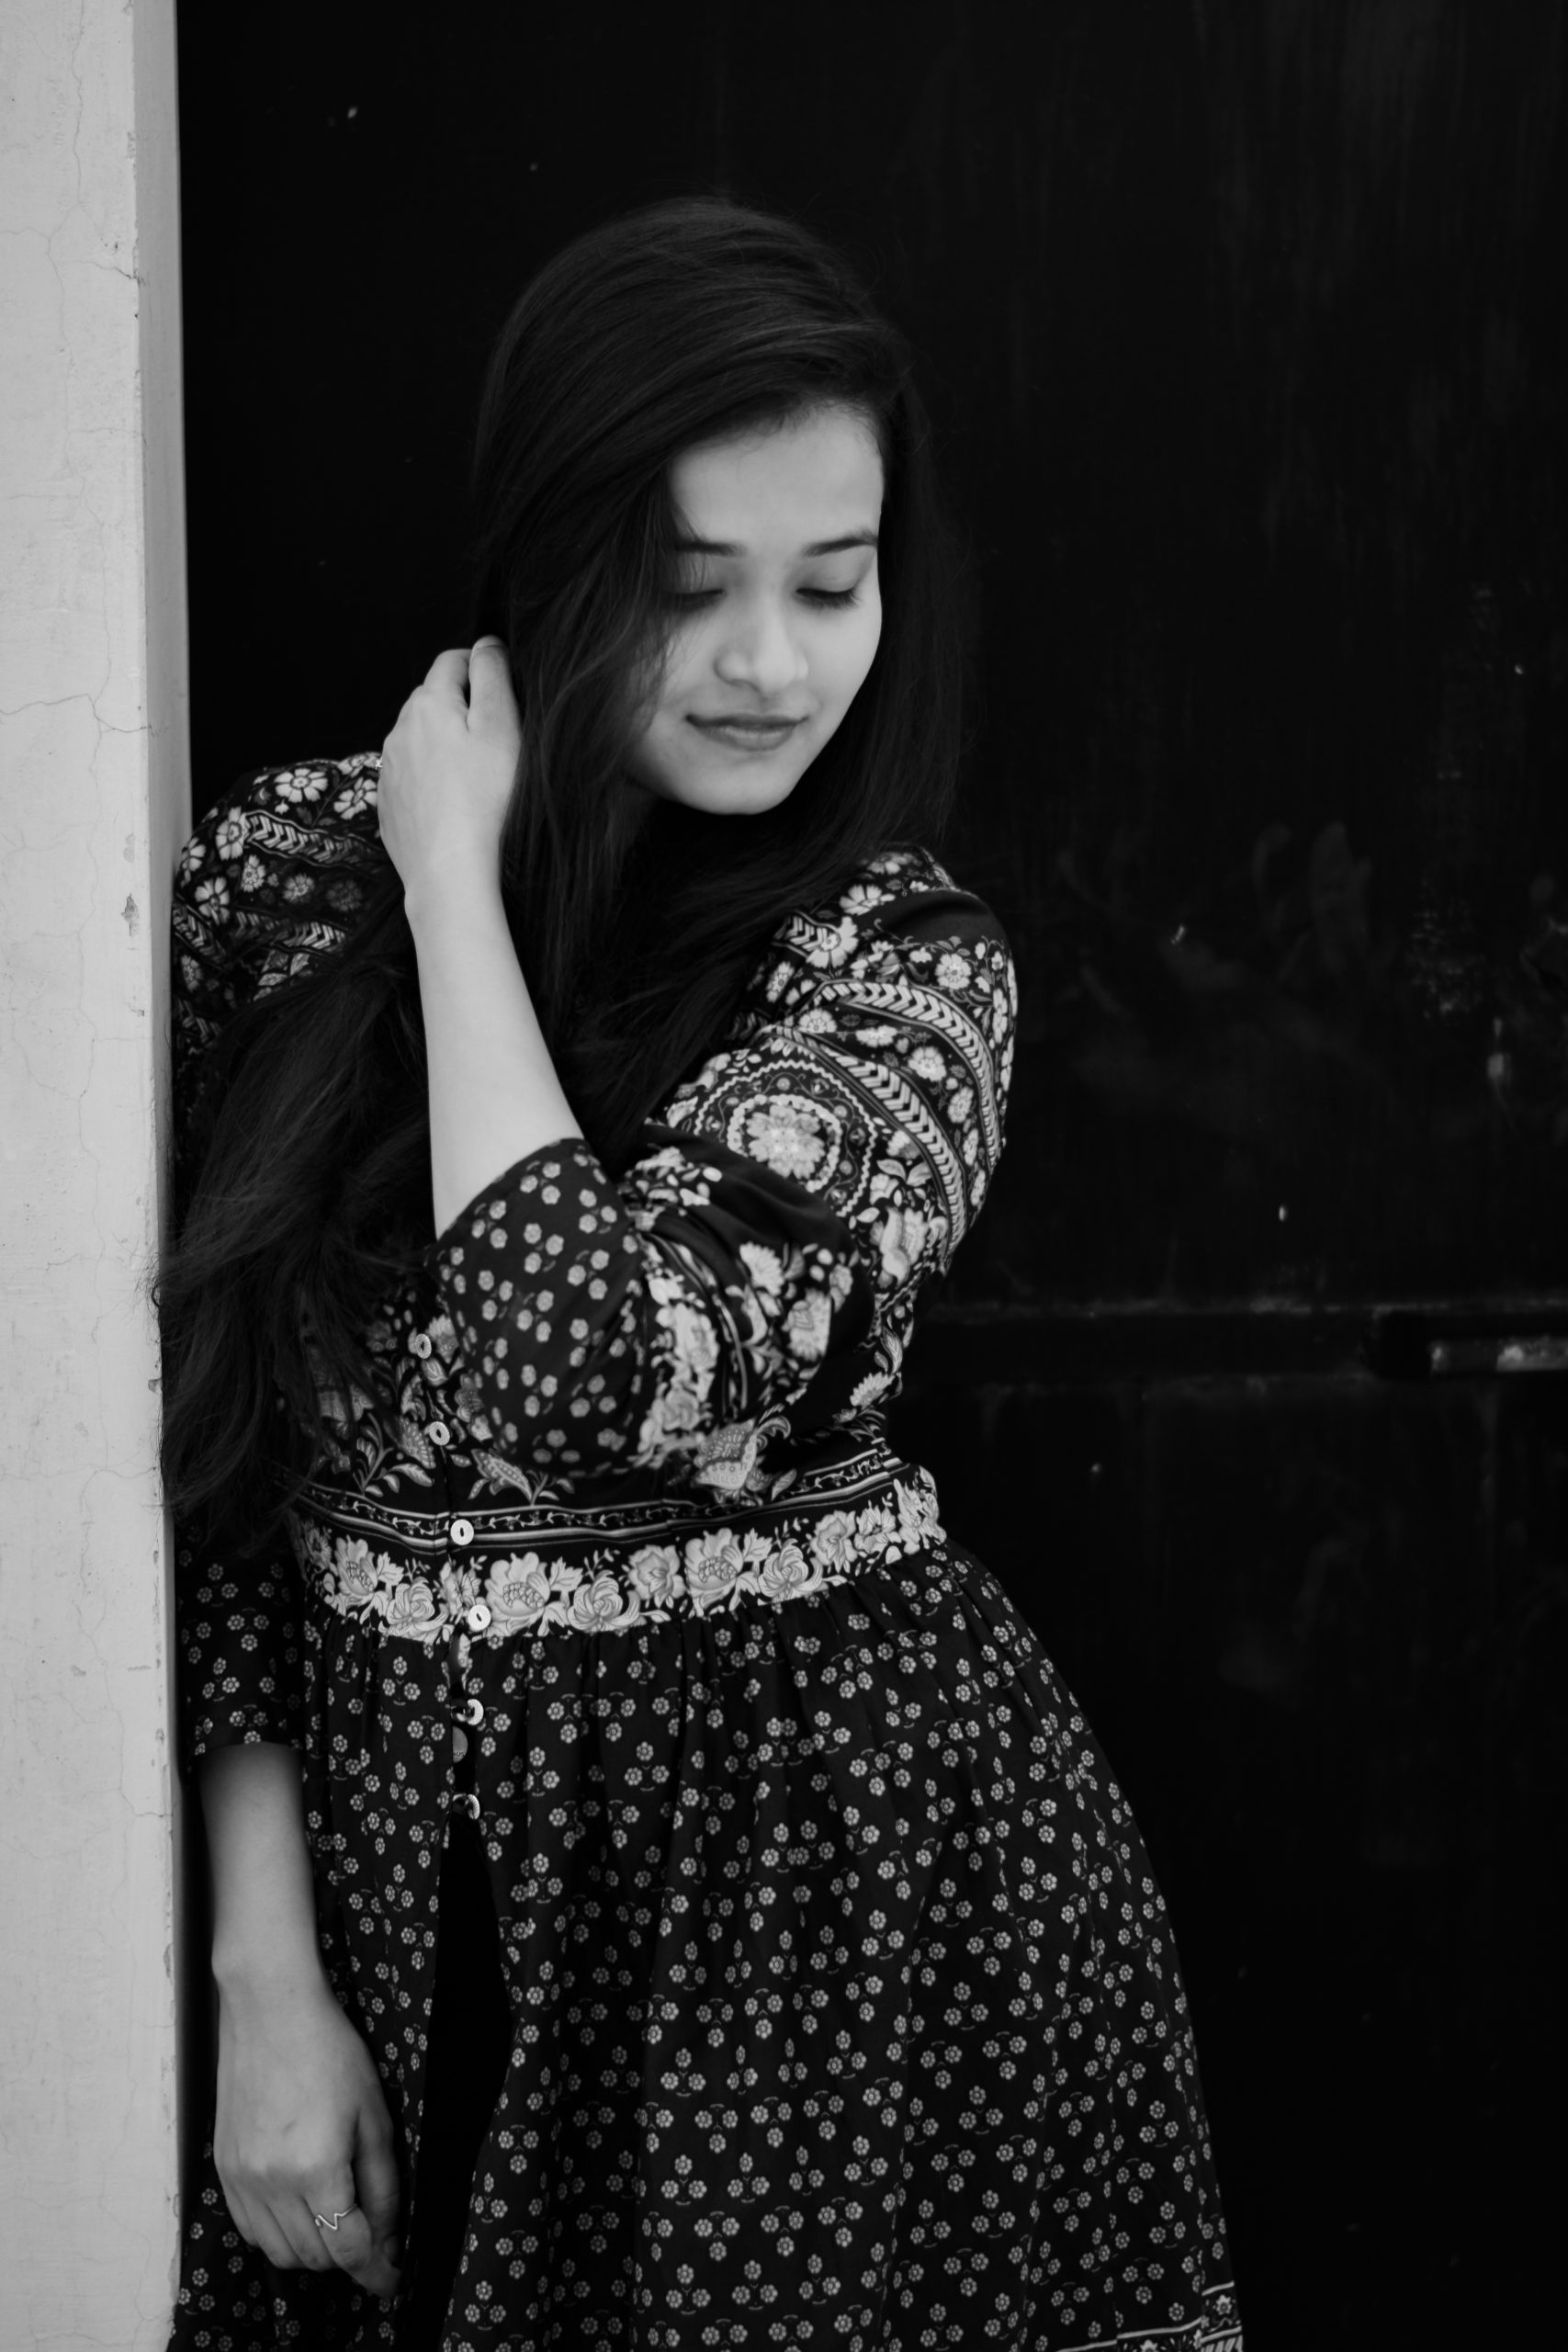 A Shy Girl Posing Free Image By Syed Fahad On